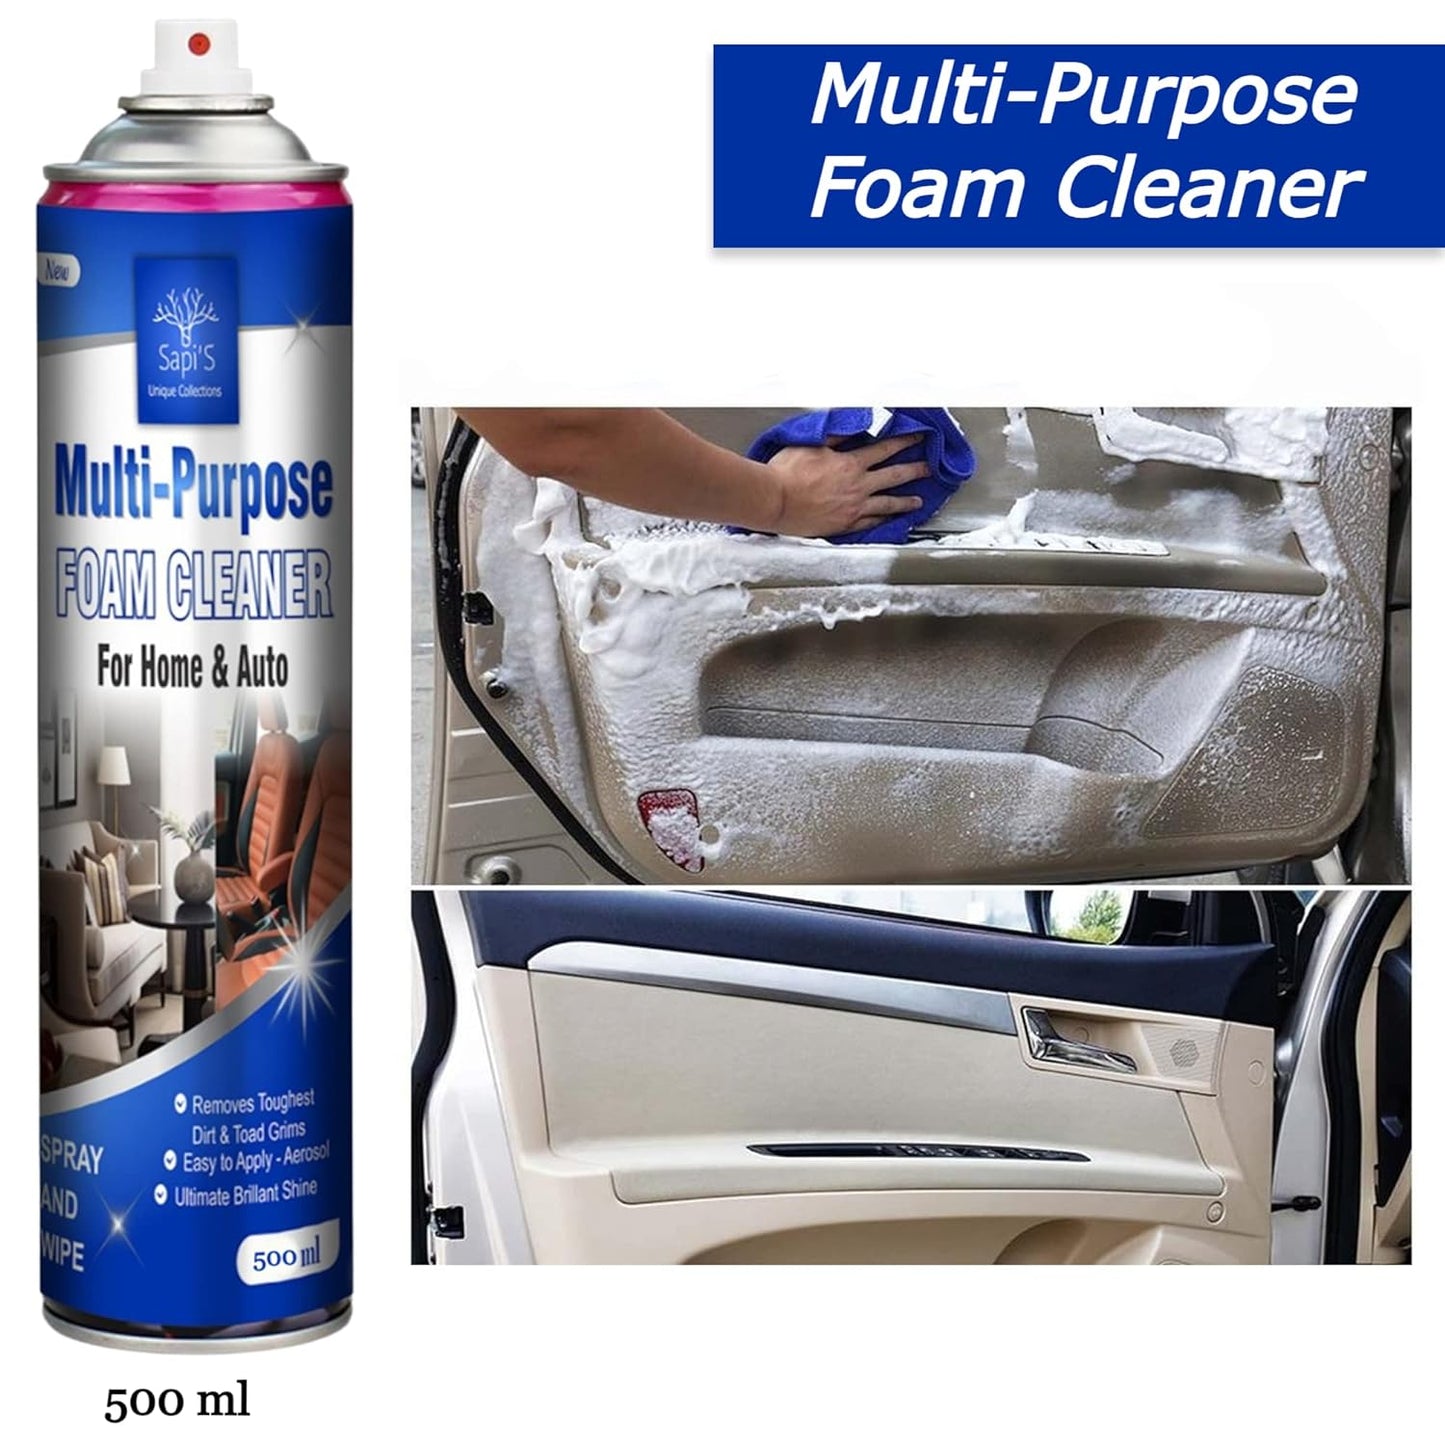 🤩Multi-Purpose Foam Cleaner for Home and Car Interiors🤩